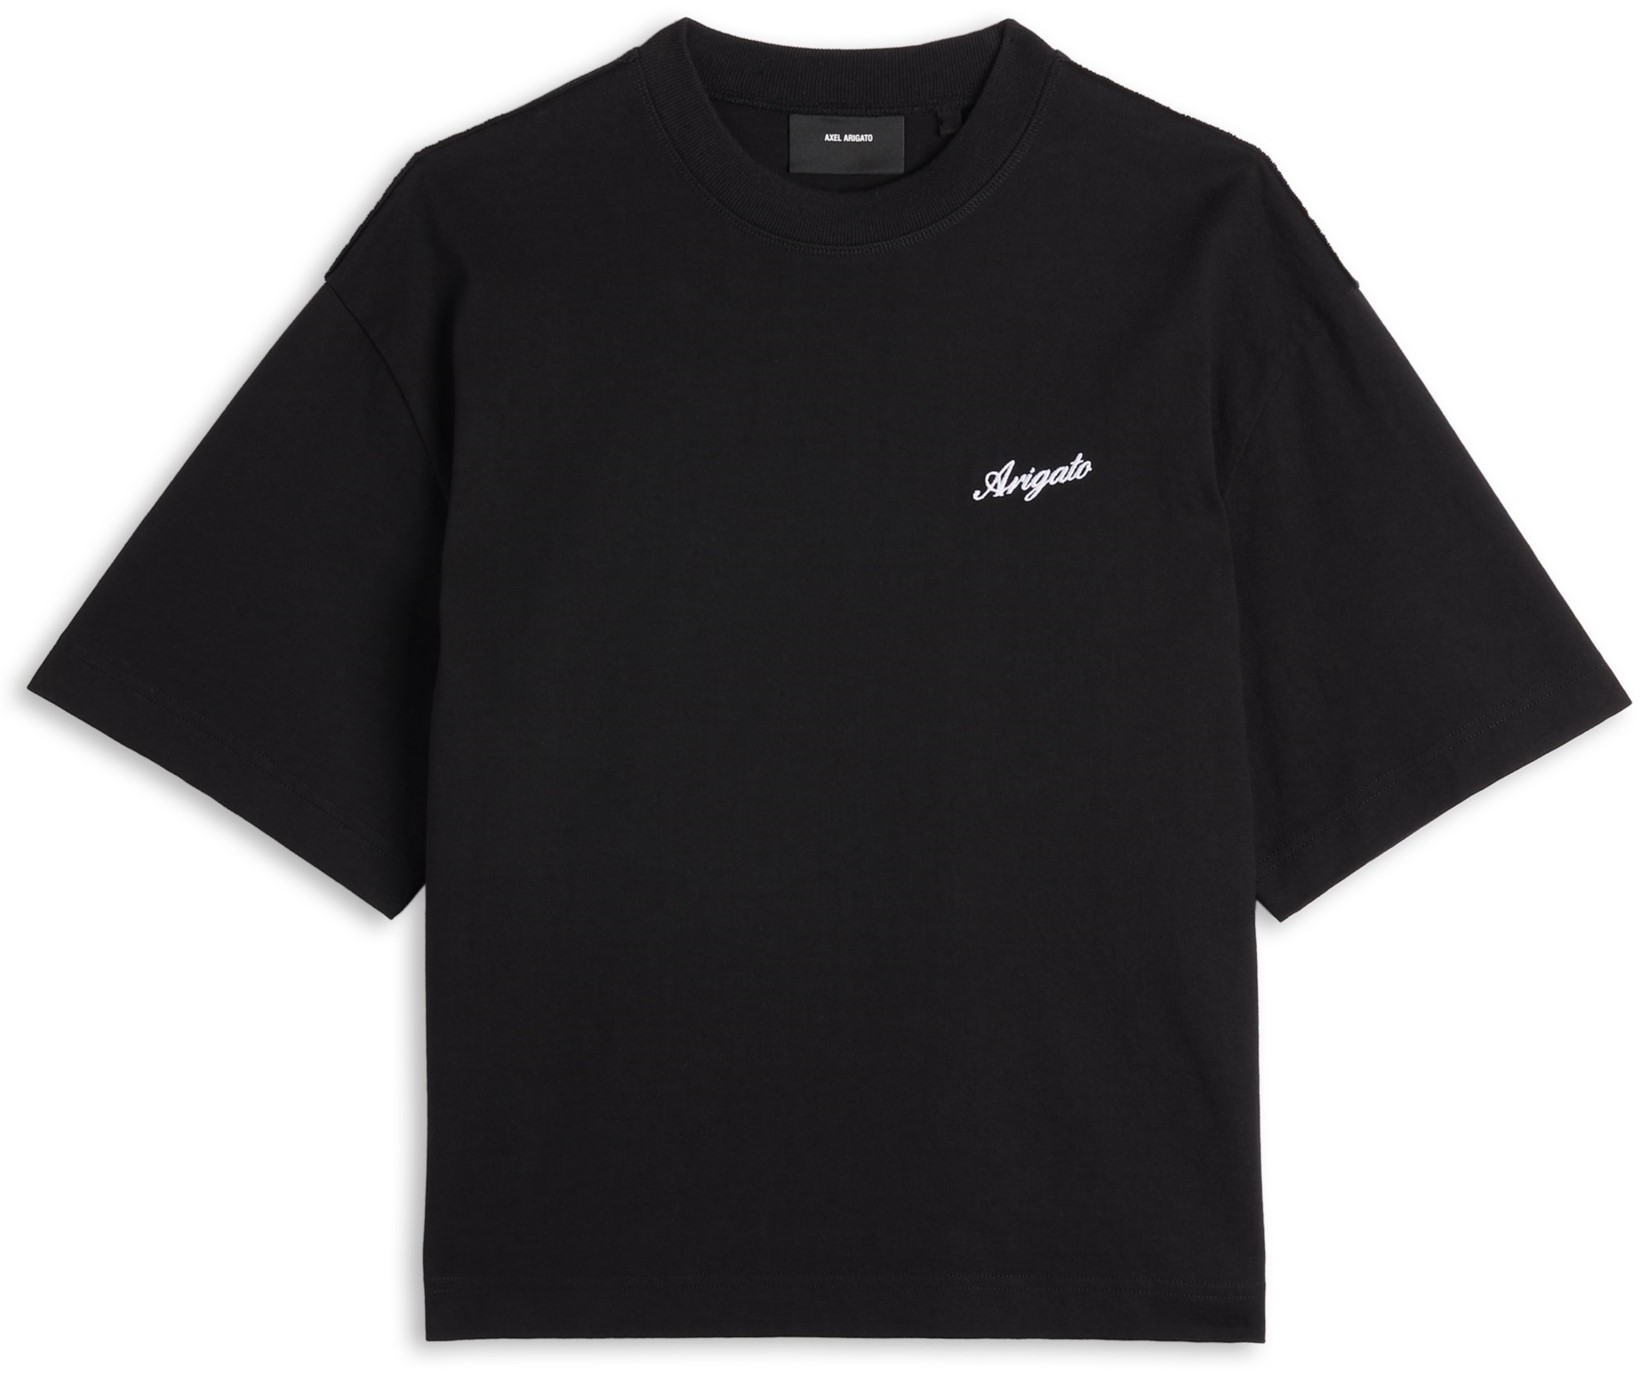 AXEL ARIGATO Honor T-Shirt in Black S